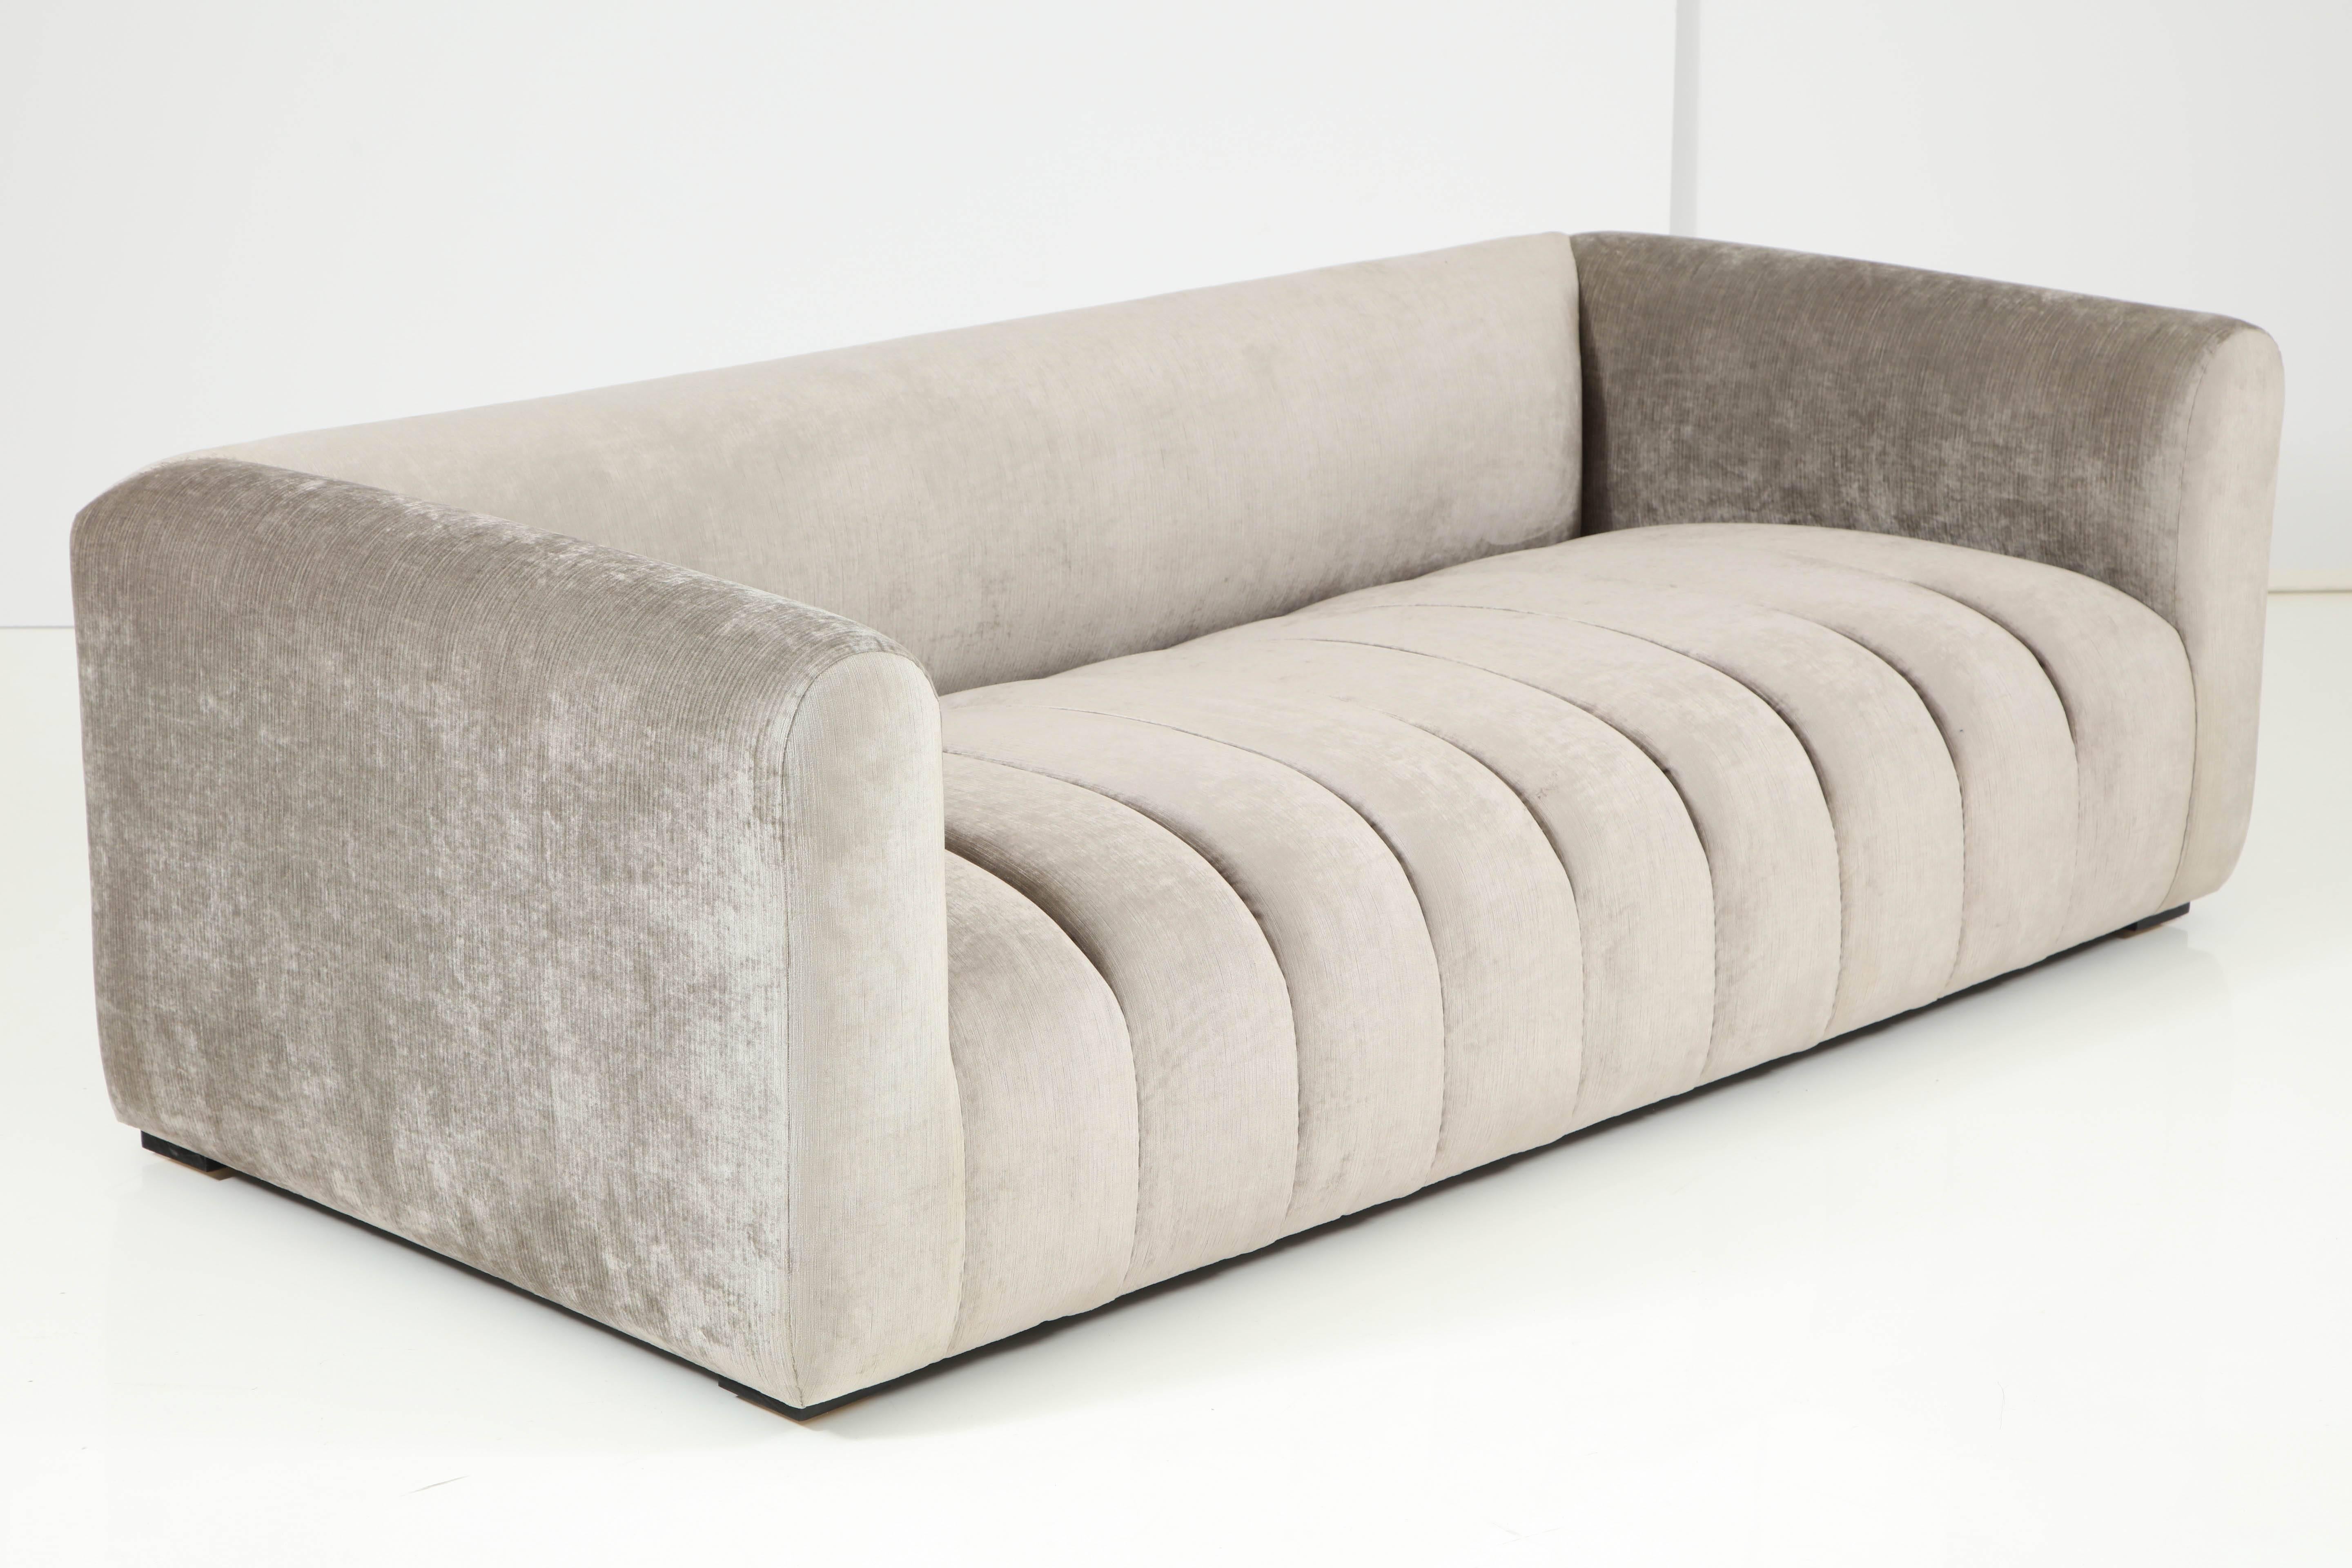 Stunning Channel Sofa by Steve Chase offered by Prime Gallery 2